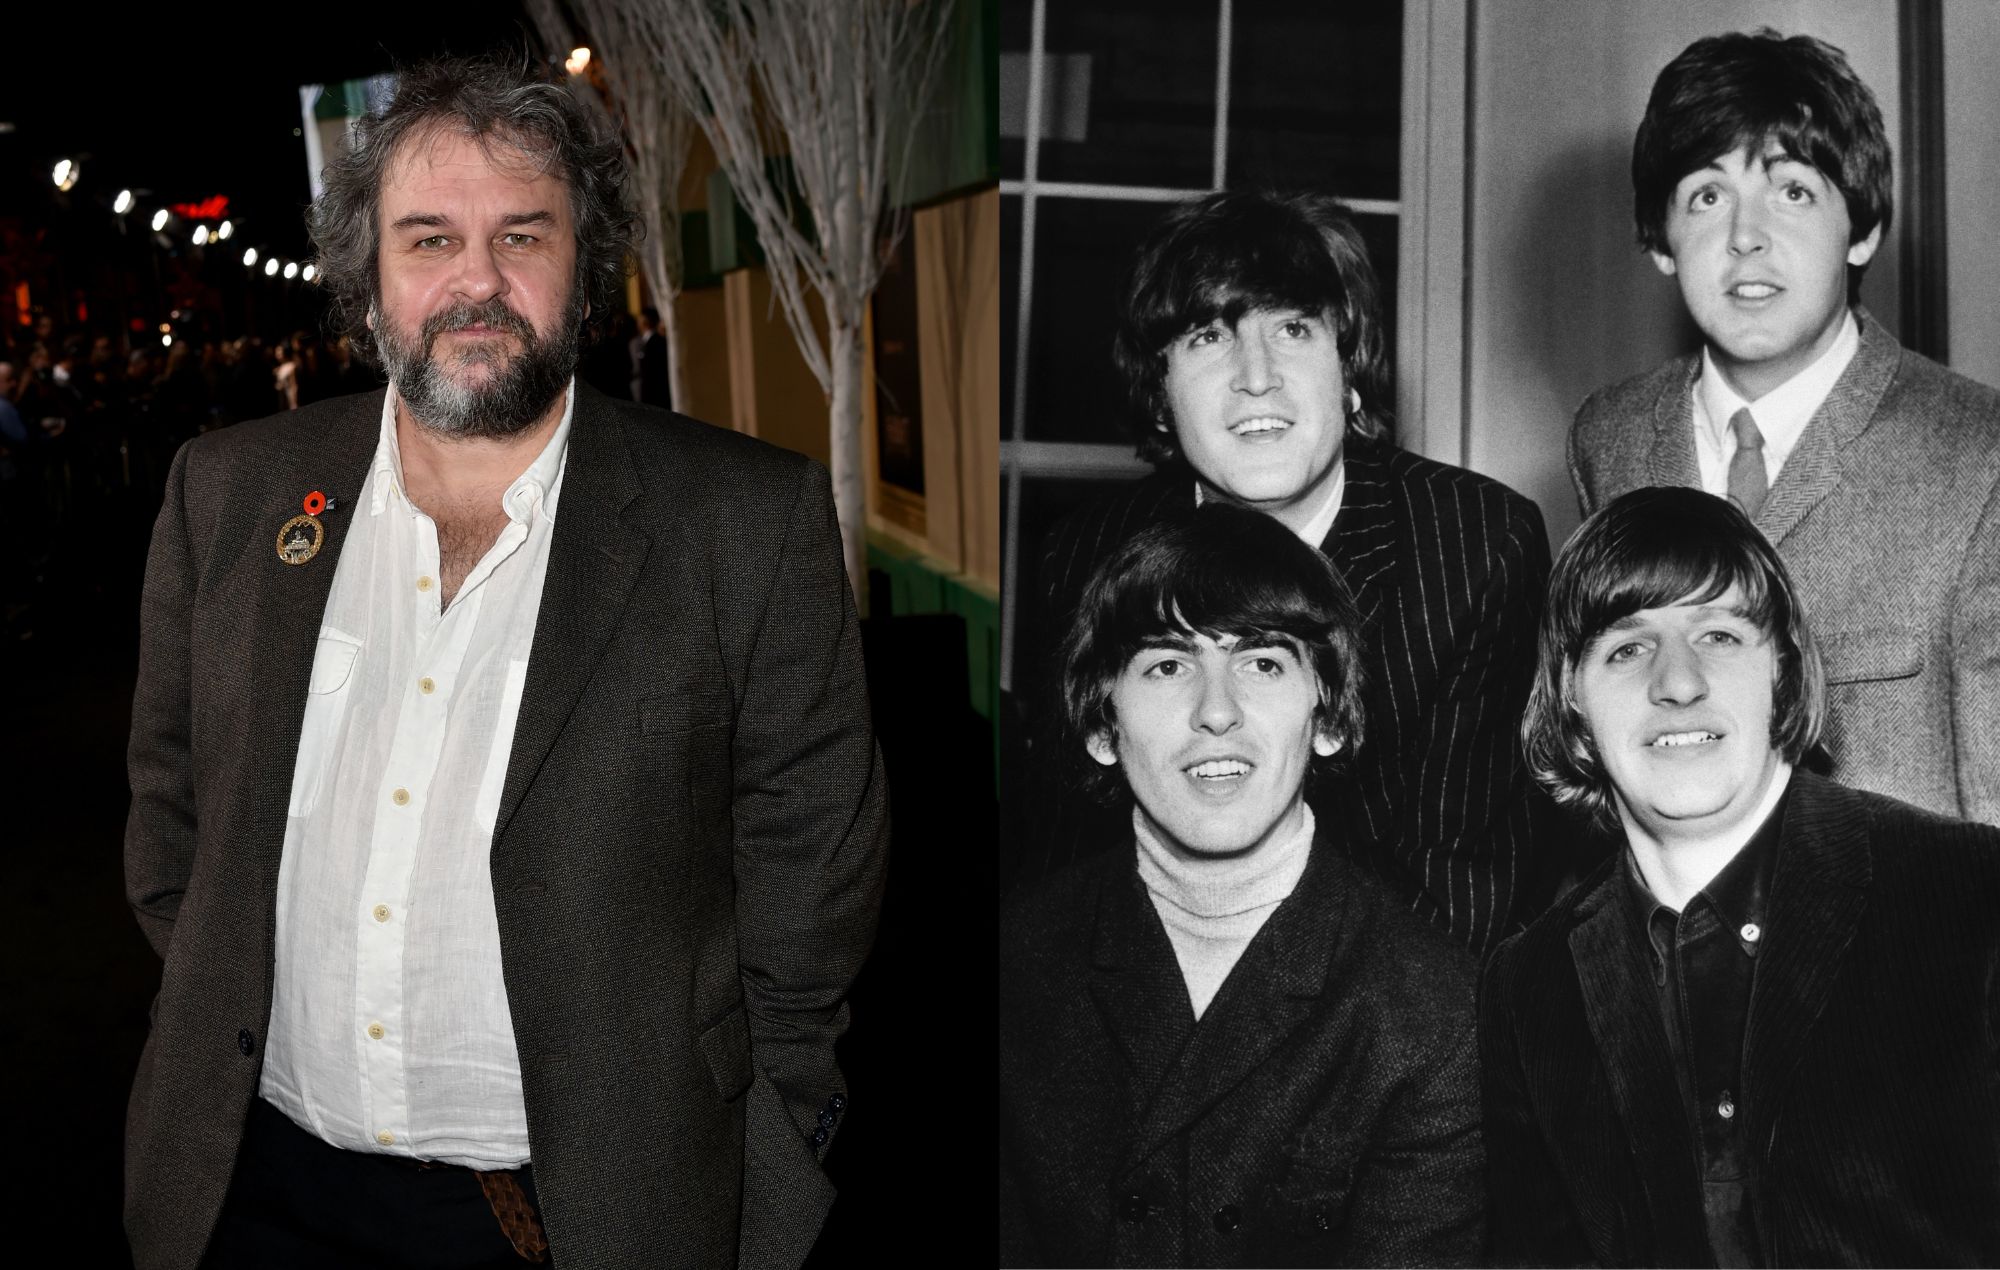 Peter Jackson directs music video for “final” Beatles song using newly unearthed footage